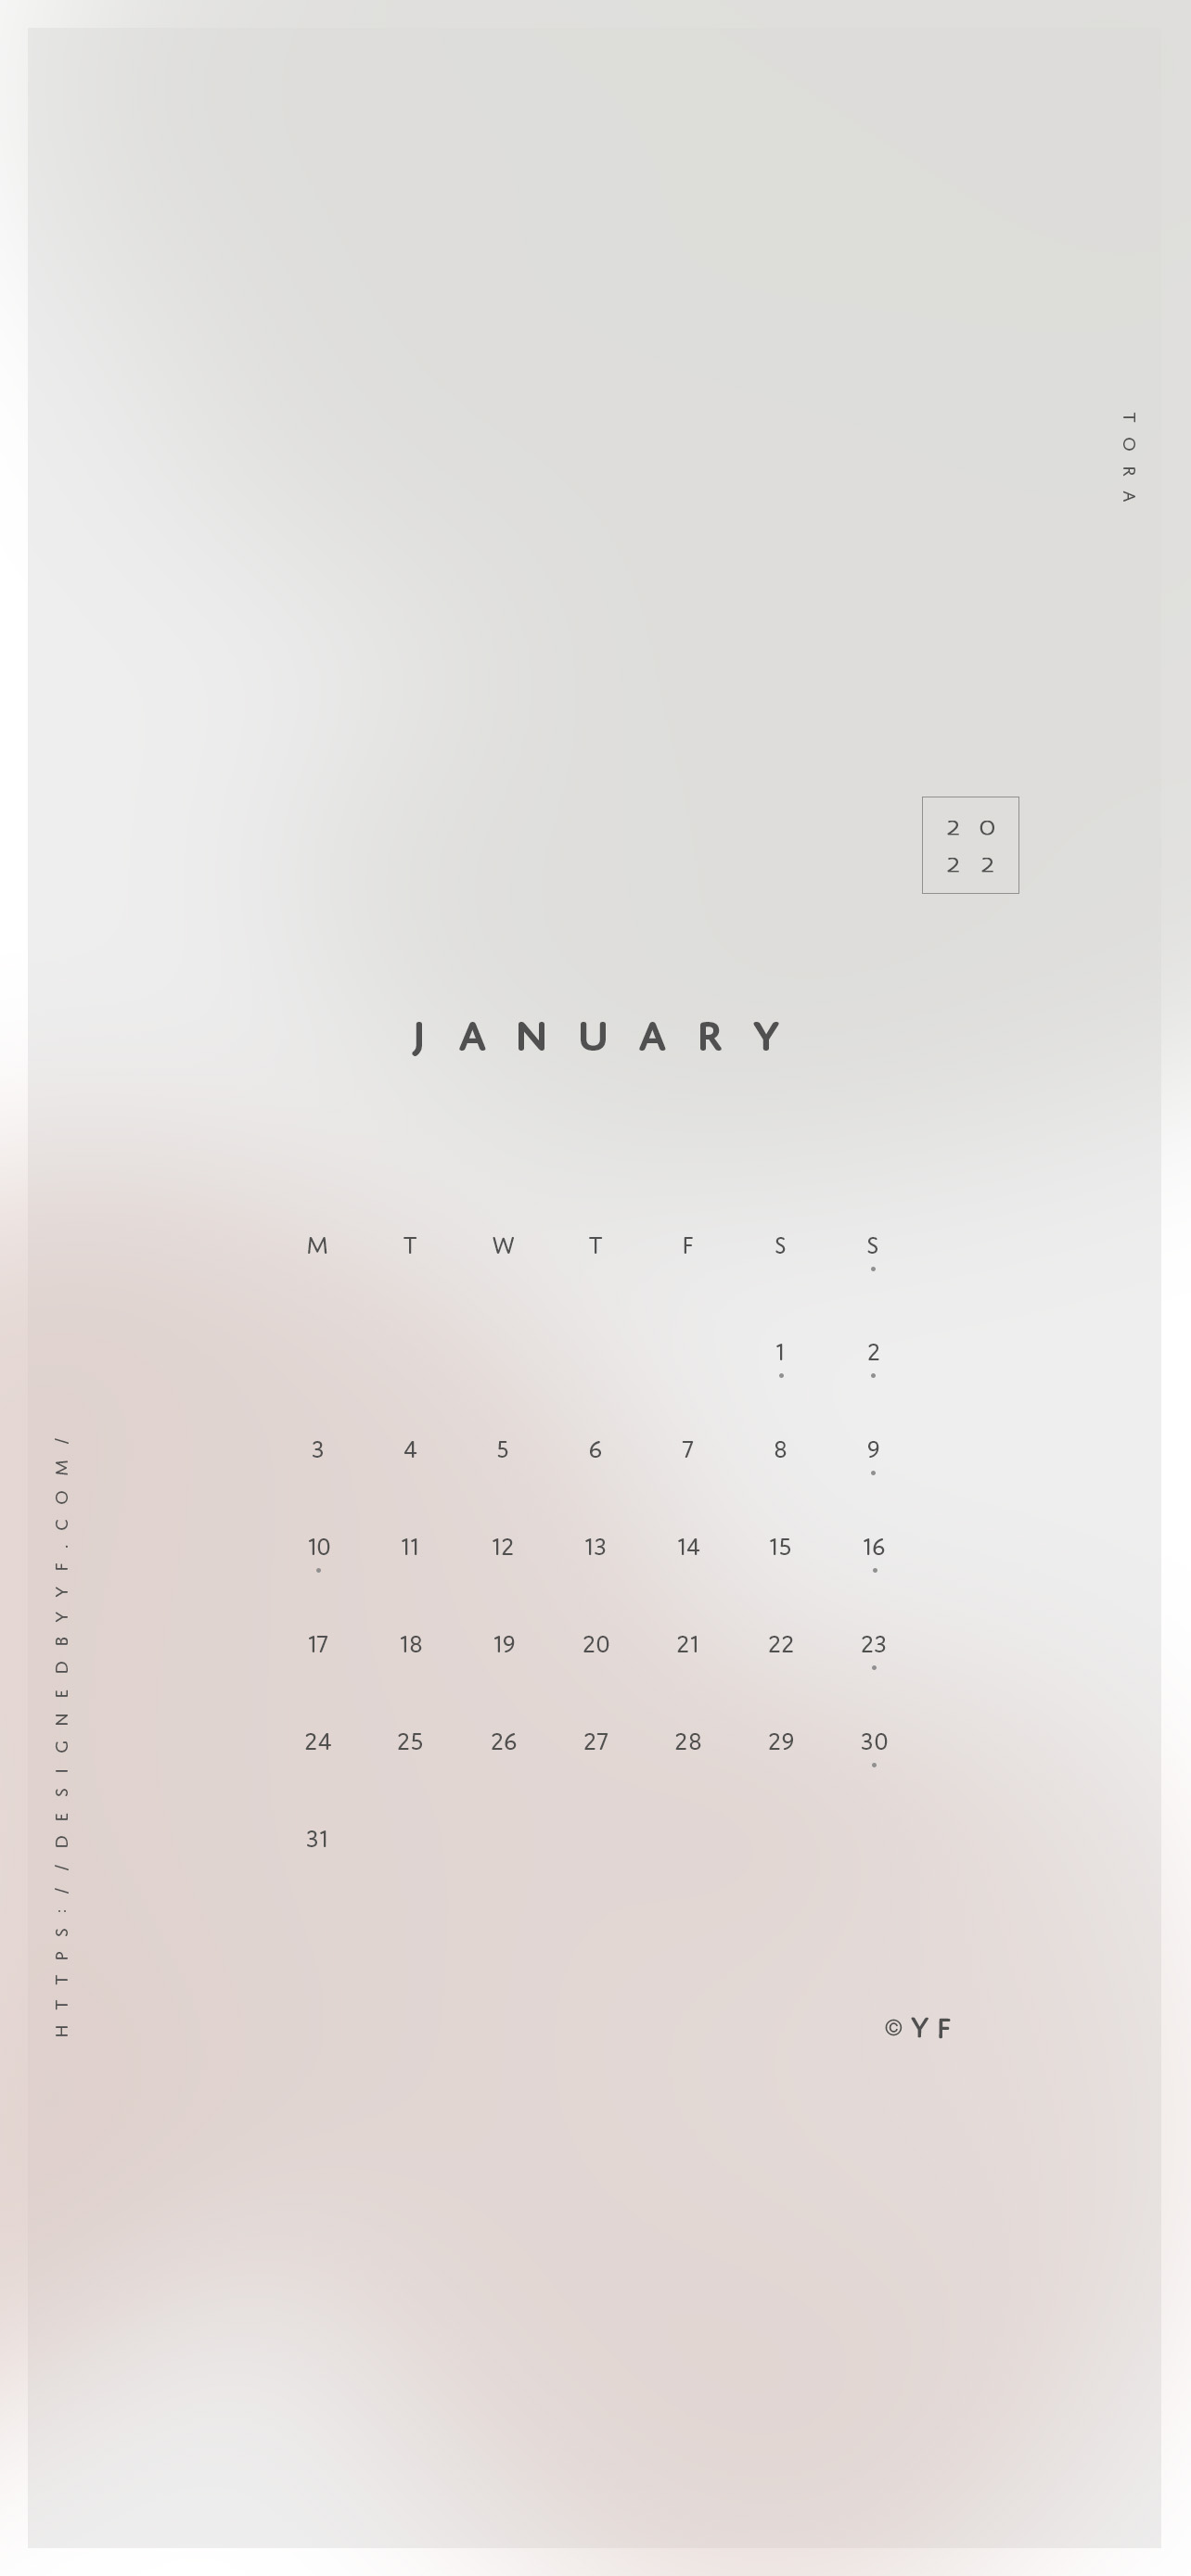 January 22 Calendar Wallpaper For The Iphone Design By Yf